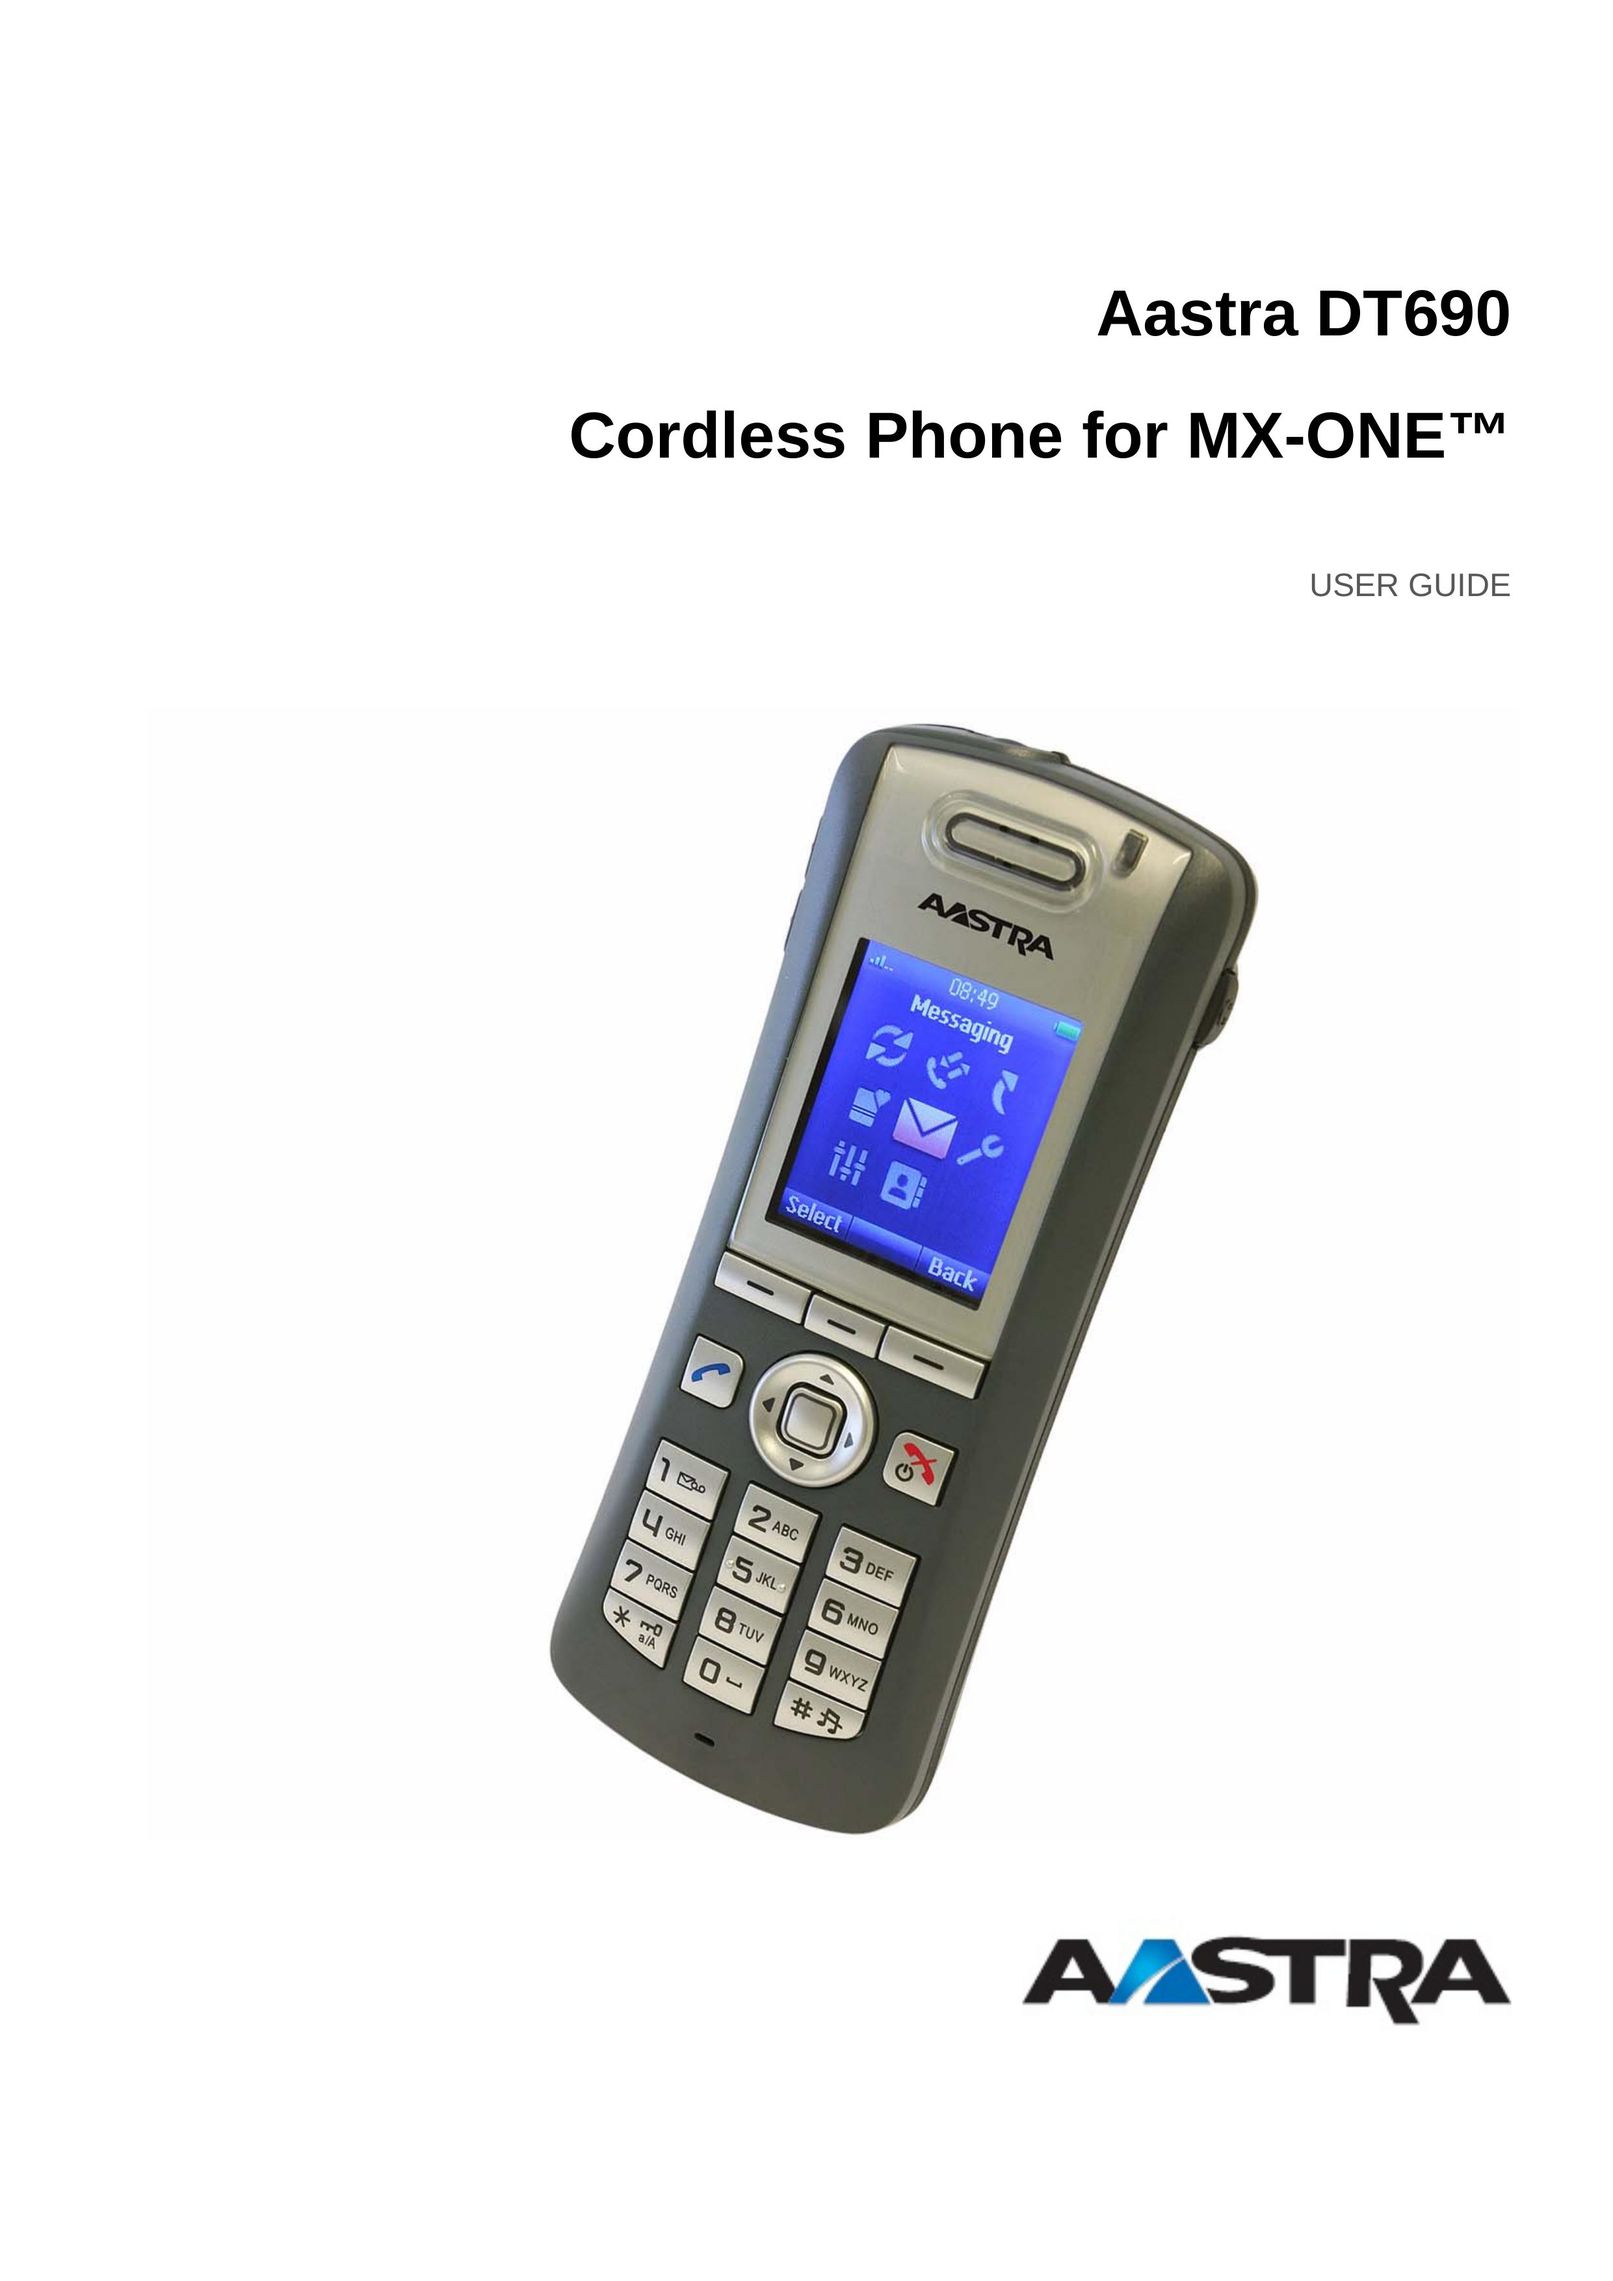 Aastra Telecom DT690 Cordless Telephone User Manual